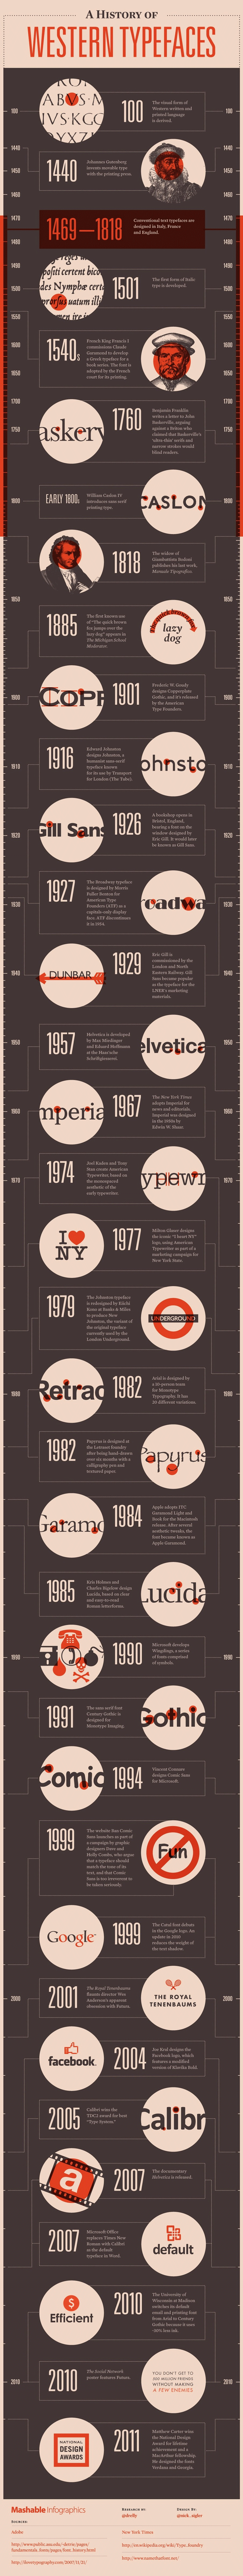 A-History-of-Western-Typefaces